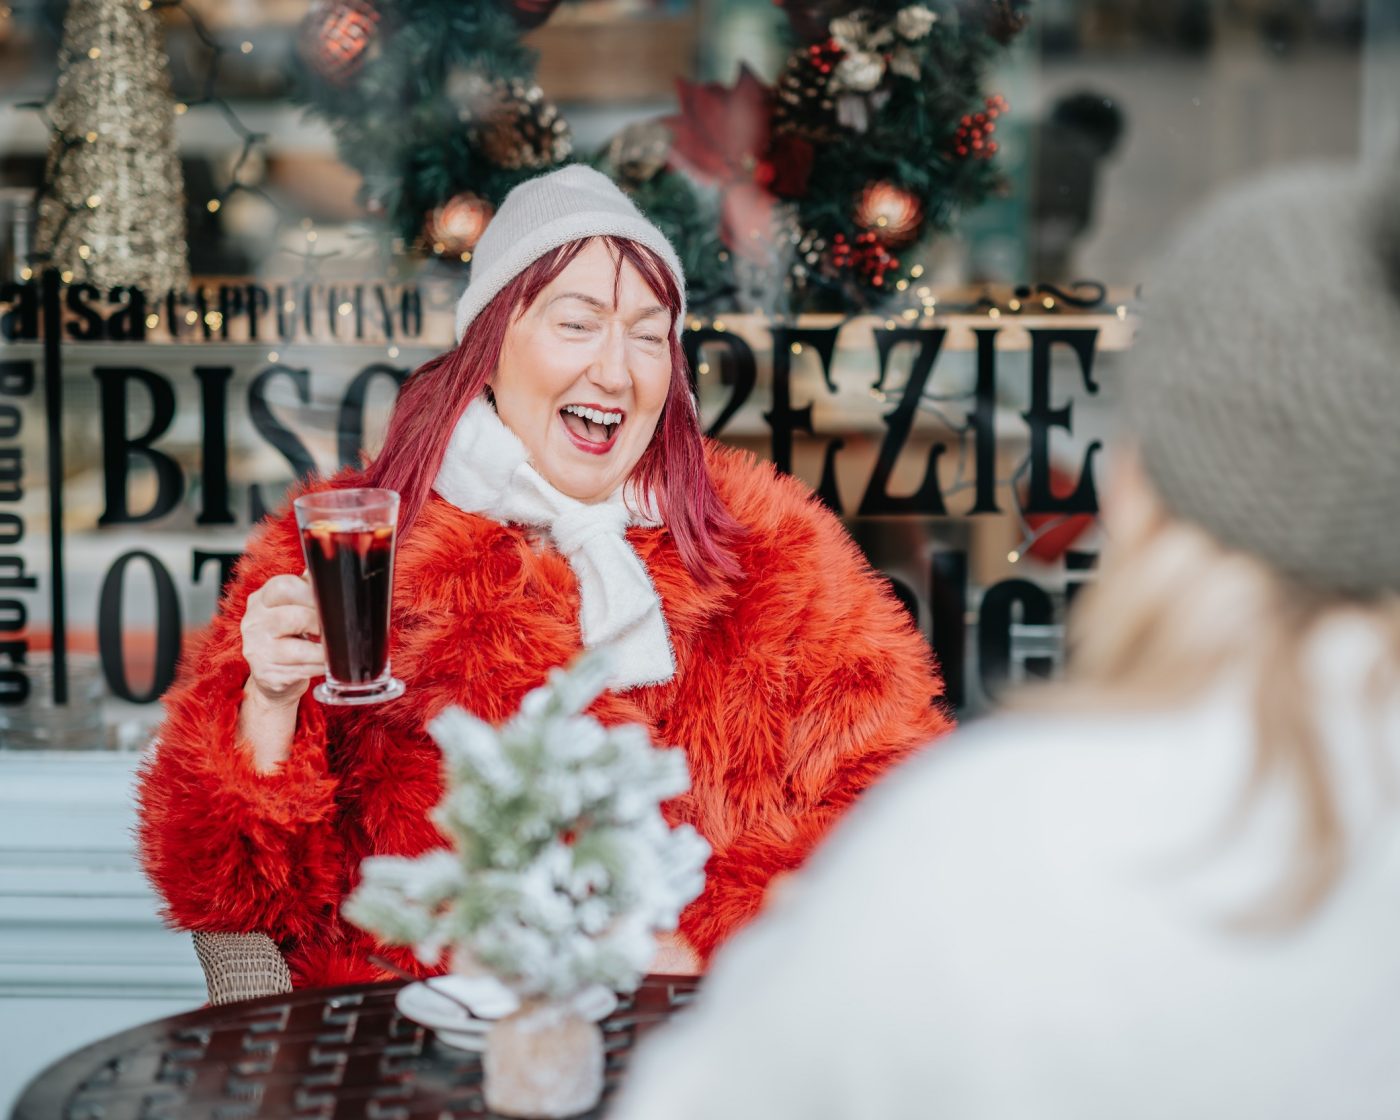 Woman wearing festive outfit enjoying a glass of mulled wine